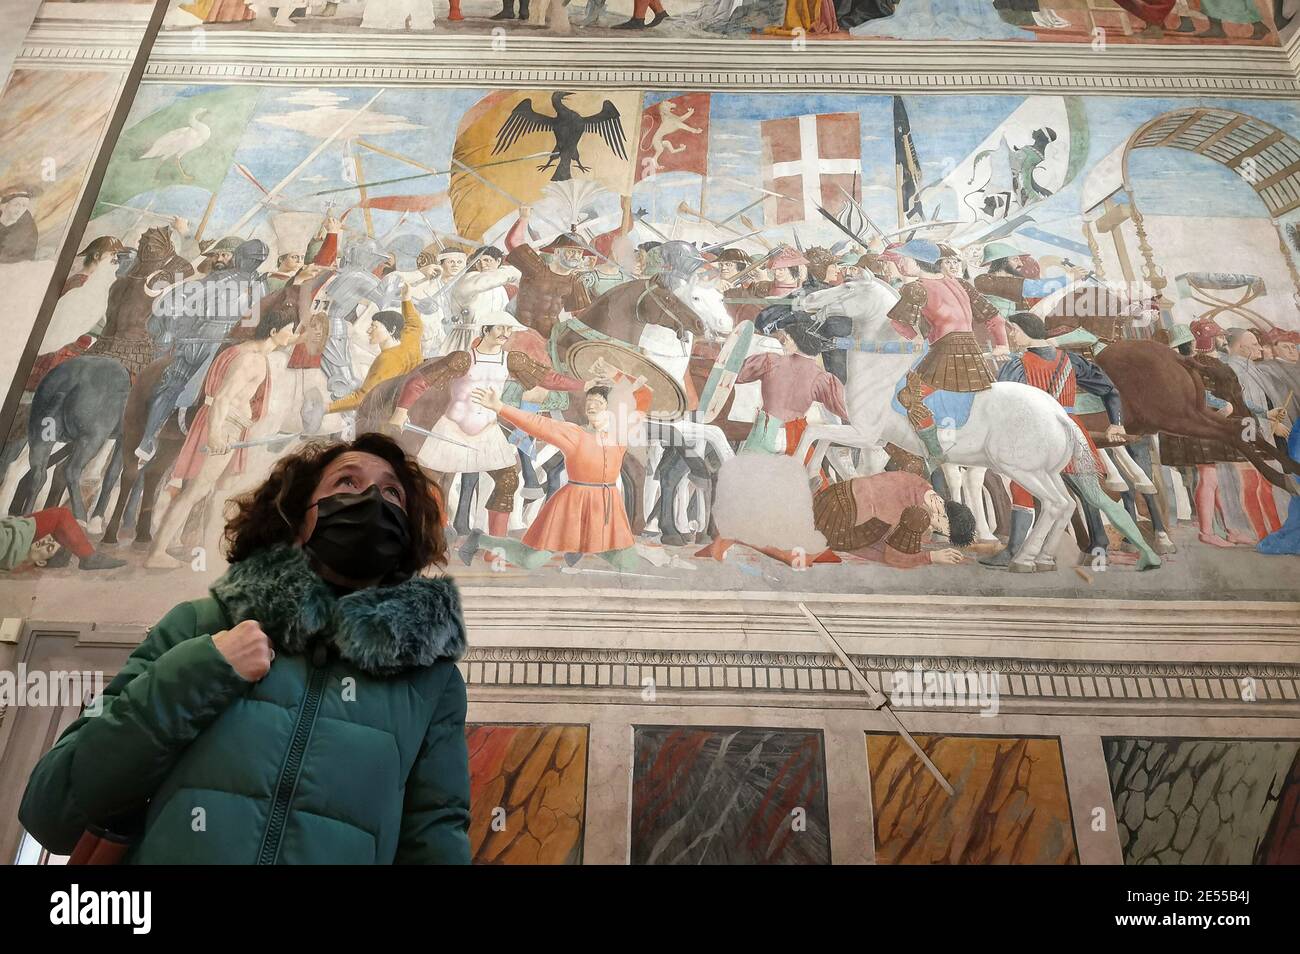 Italy, Tuscany region, Arezzo, January 26, 2021 : Basilica of San Francesco, the frescoes  'The Stories of the True Cross' painted by Piero della Francesca, today reopening after the closure due the covid-19 pandemic. In the picture visitors wear protetion masks while visiting the exposition.   Photo © Daiano Cristini/Sintesi/Alamy Live News Stock Photo